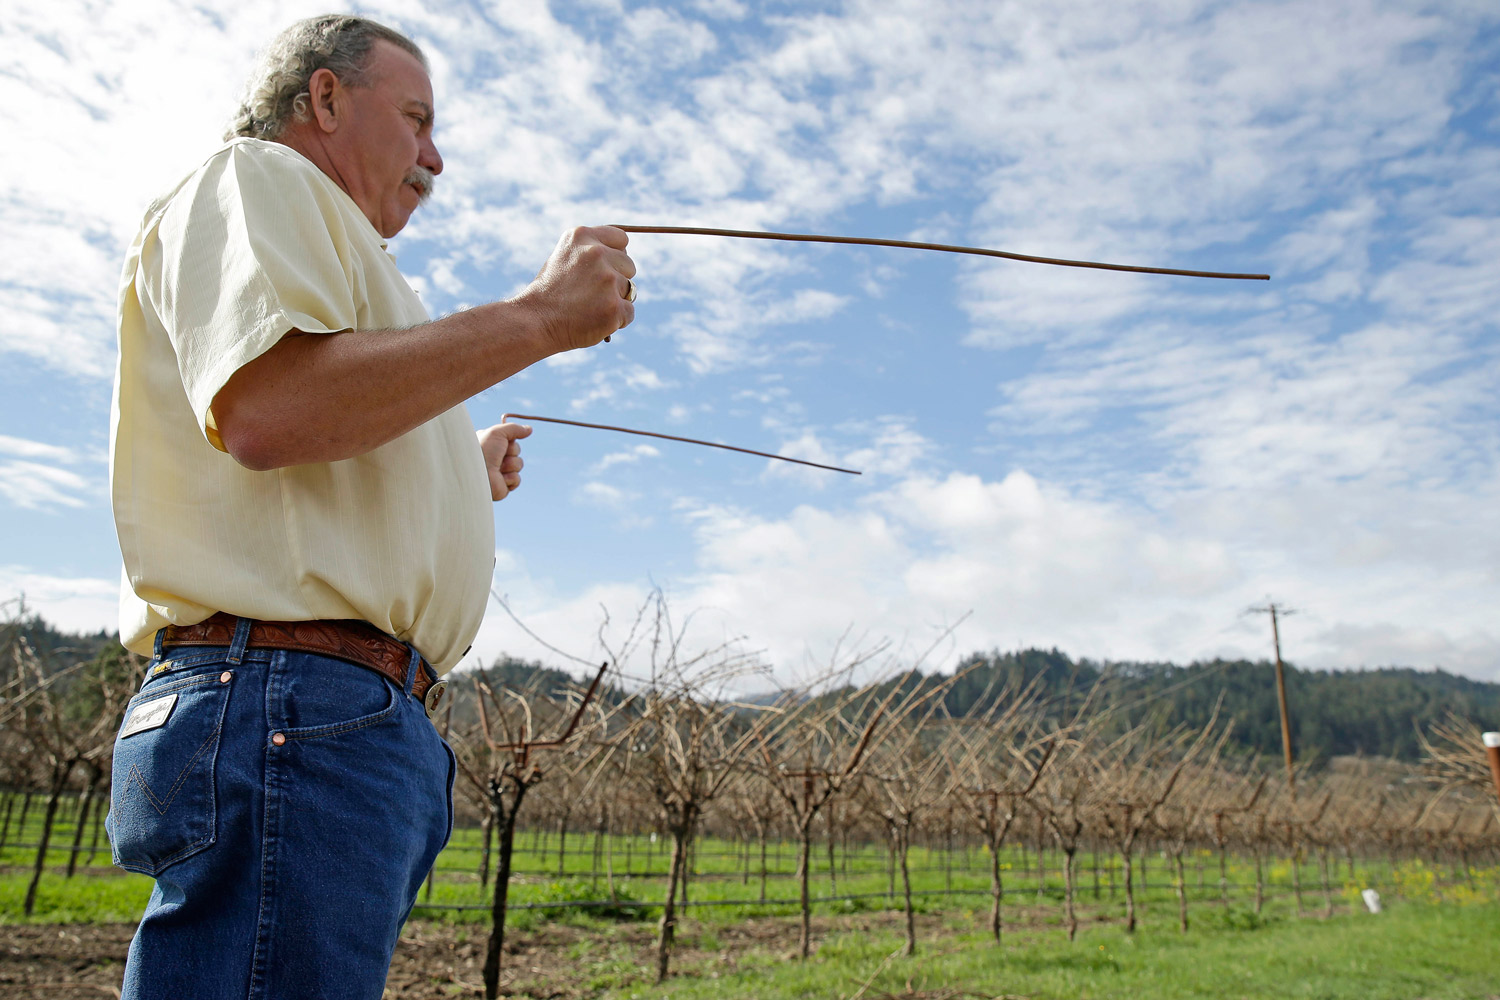 Proprietor Marc Mondavi demonstrates dowsing with "diving rods" to locate water at the Charles Krug winery in St. Helena, Calif. (Eric Risberg—AP)